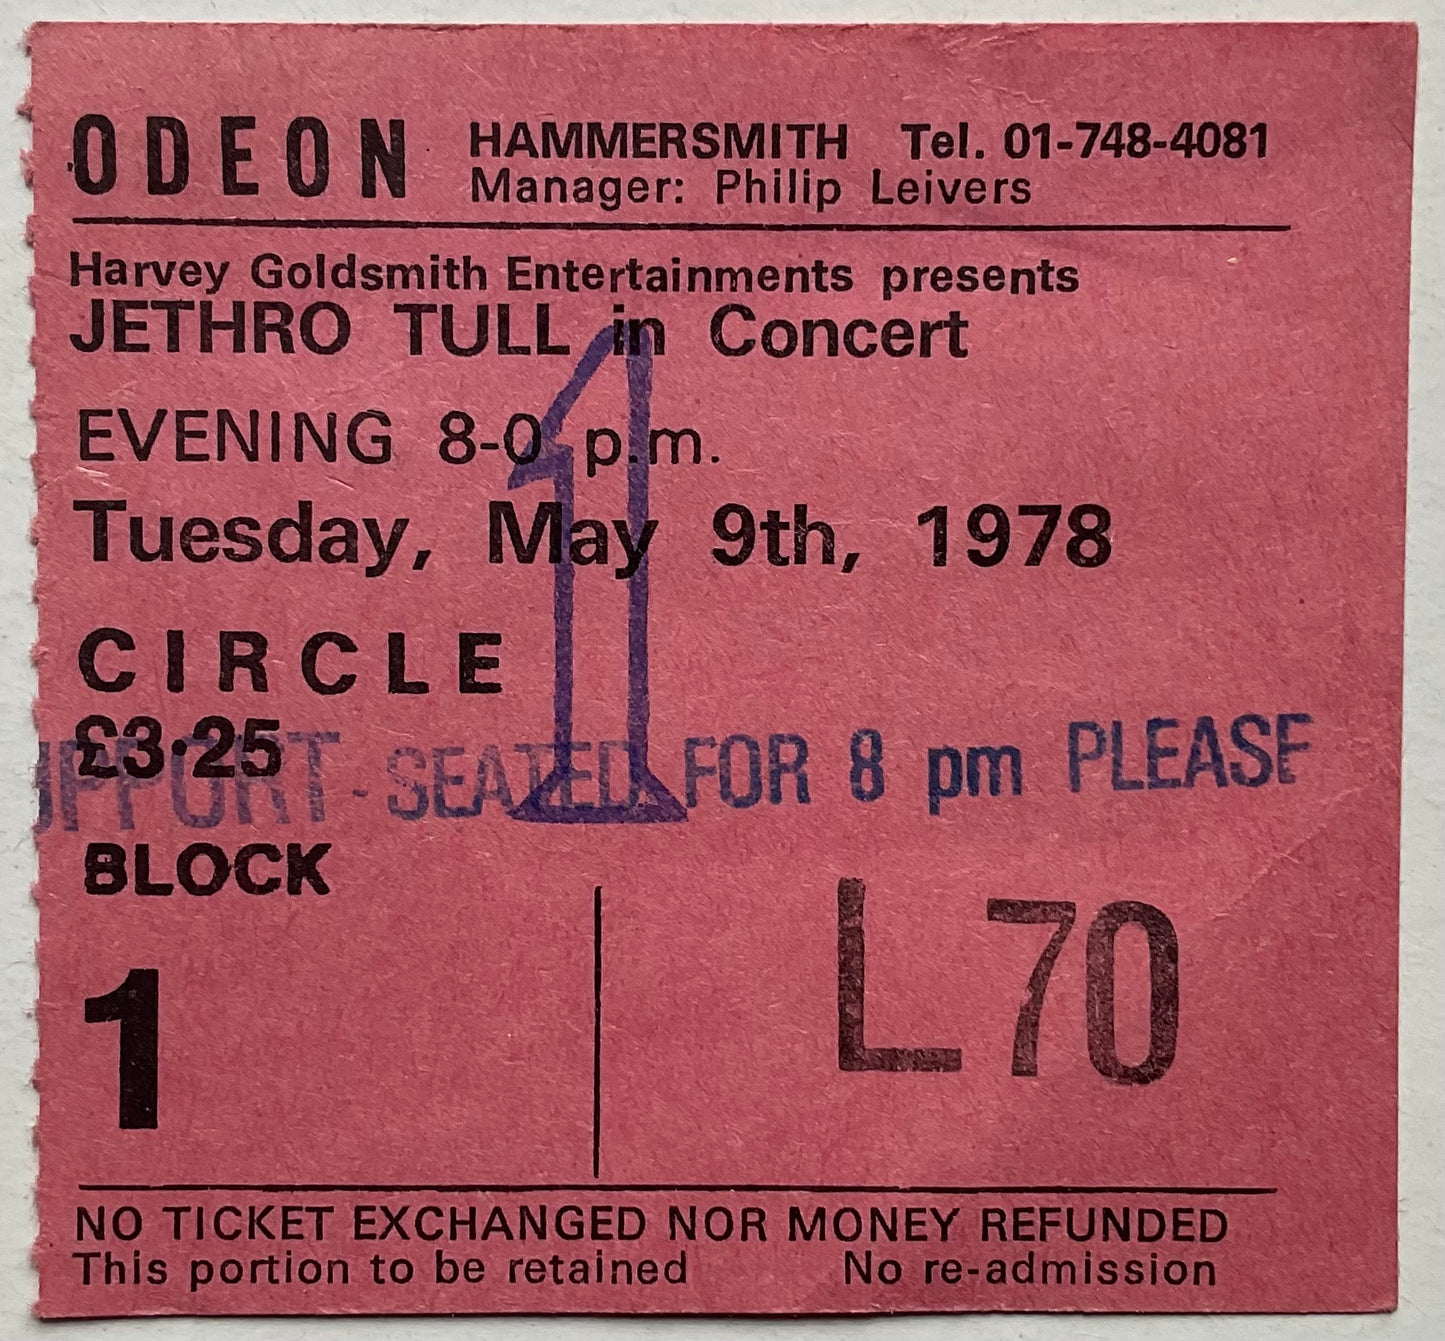 Jethro Tull Original Used Concert Ticket Hammersmith Odeon London 9th May 1978